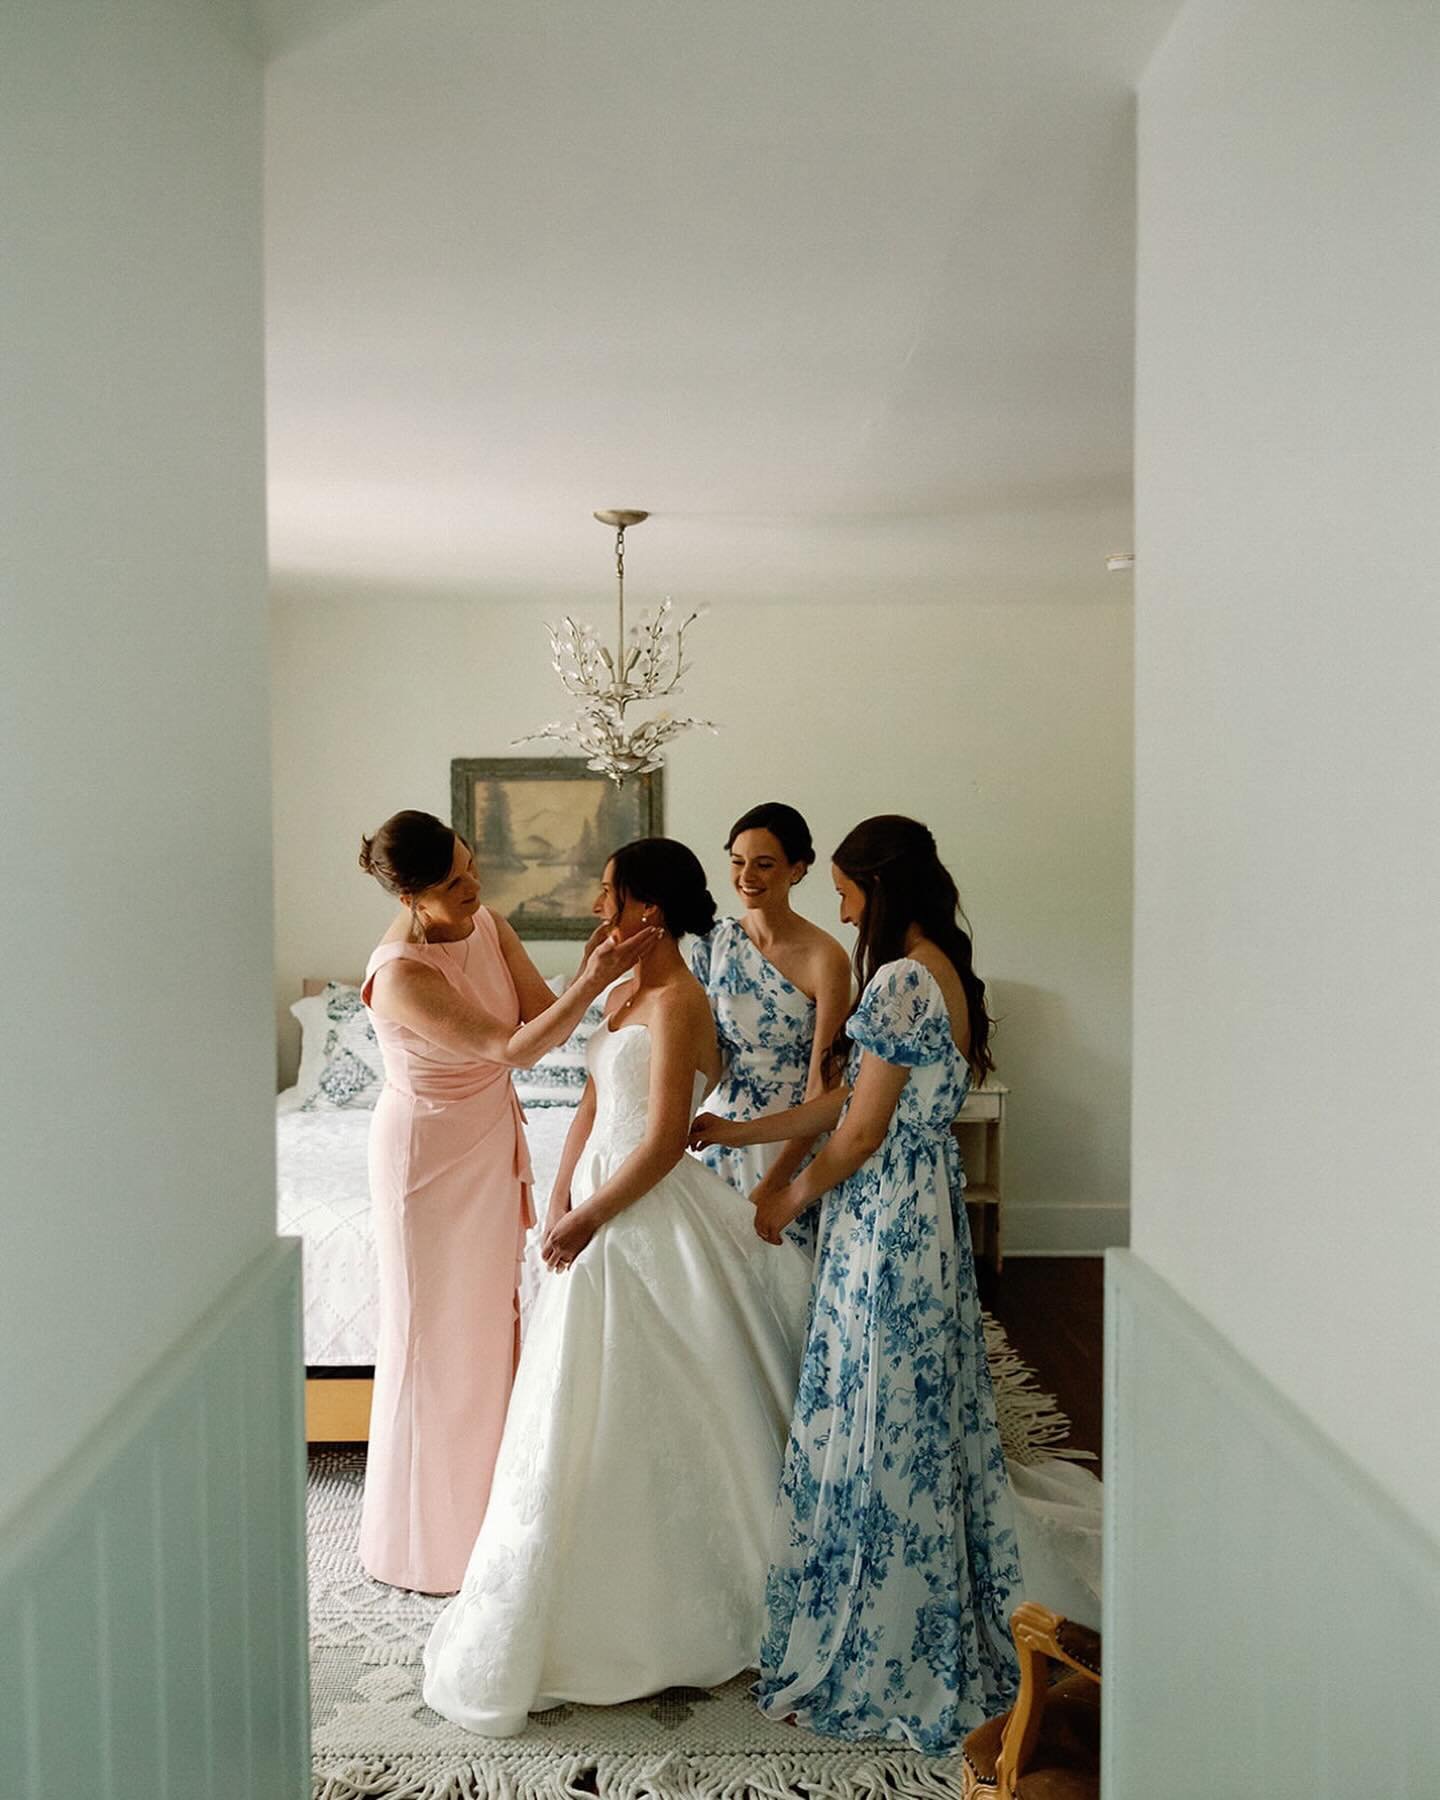 In honor of Mother&rsquo;s Day this weekend I&rsquo;m posting this set of Jaclyn getting ready for her wedding with her momma and her sisters. One of my favorite memories from that day (slide 9) was when Ann, the mother of the bride, started to slide